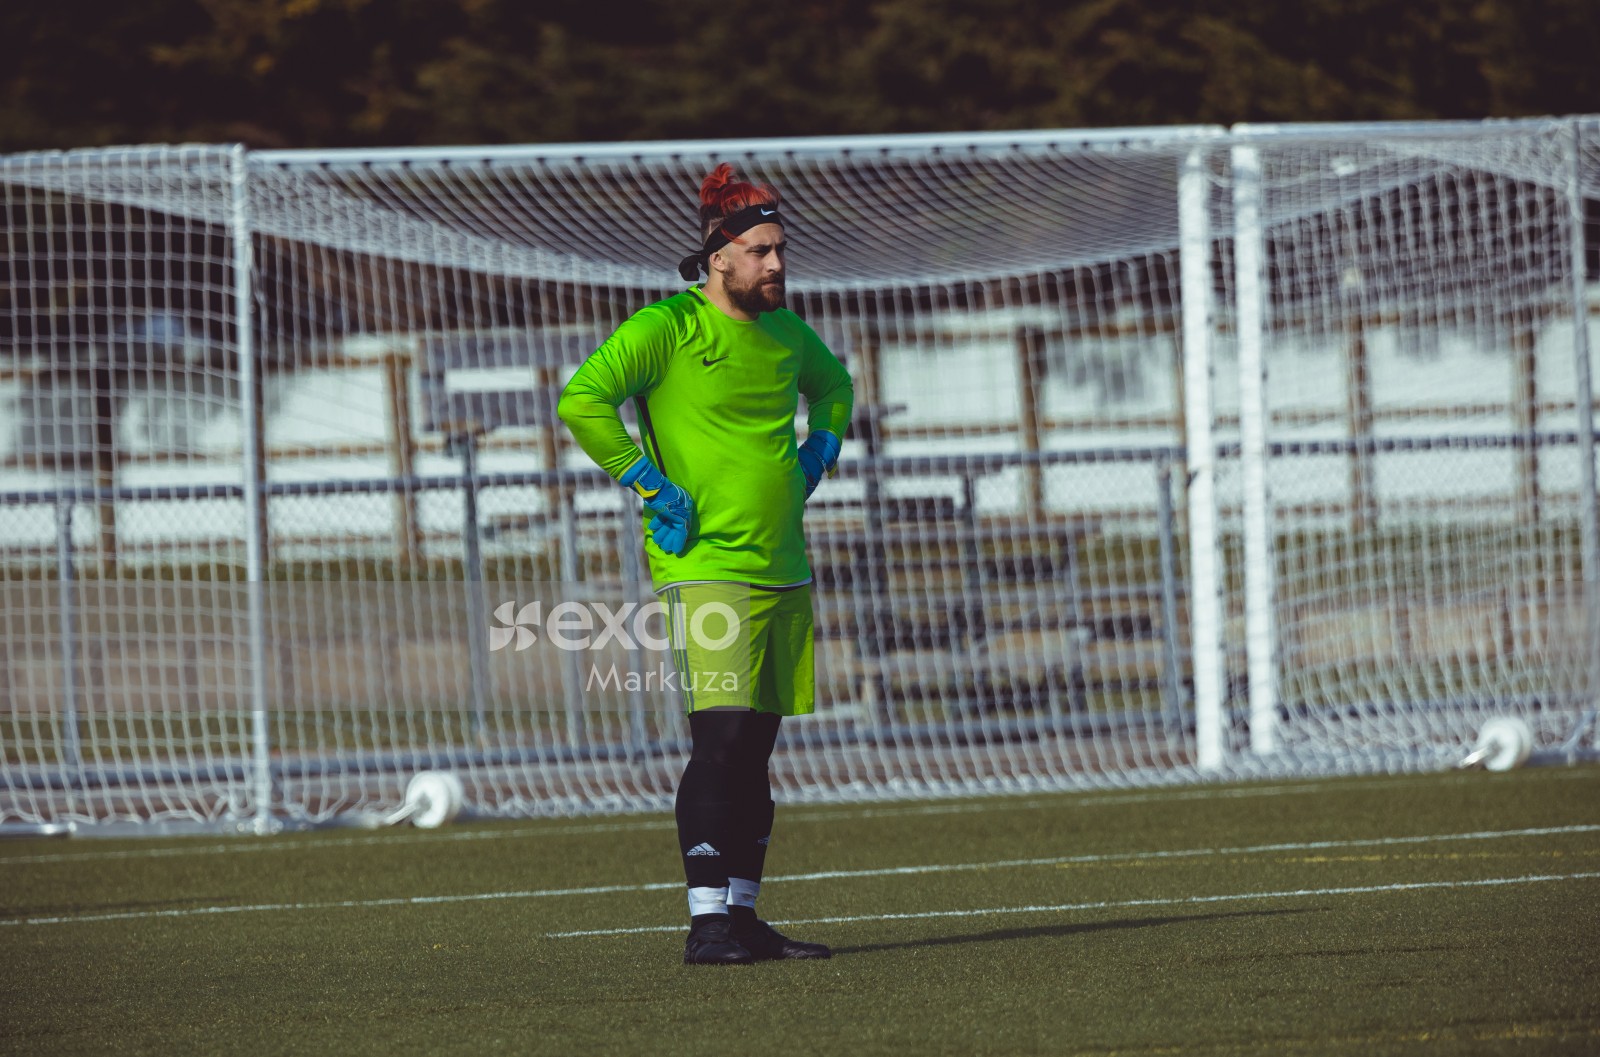 Goalkeeper with red hair and parrot green Nike shirt - Sports Zone sunday league